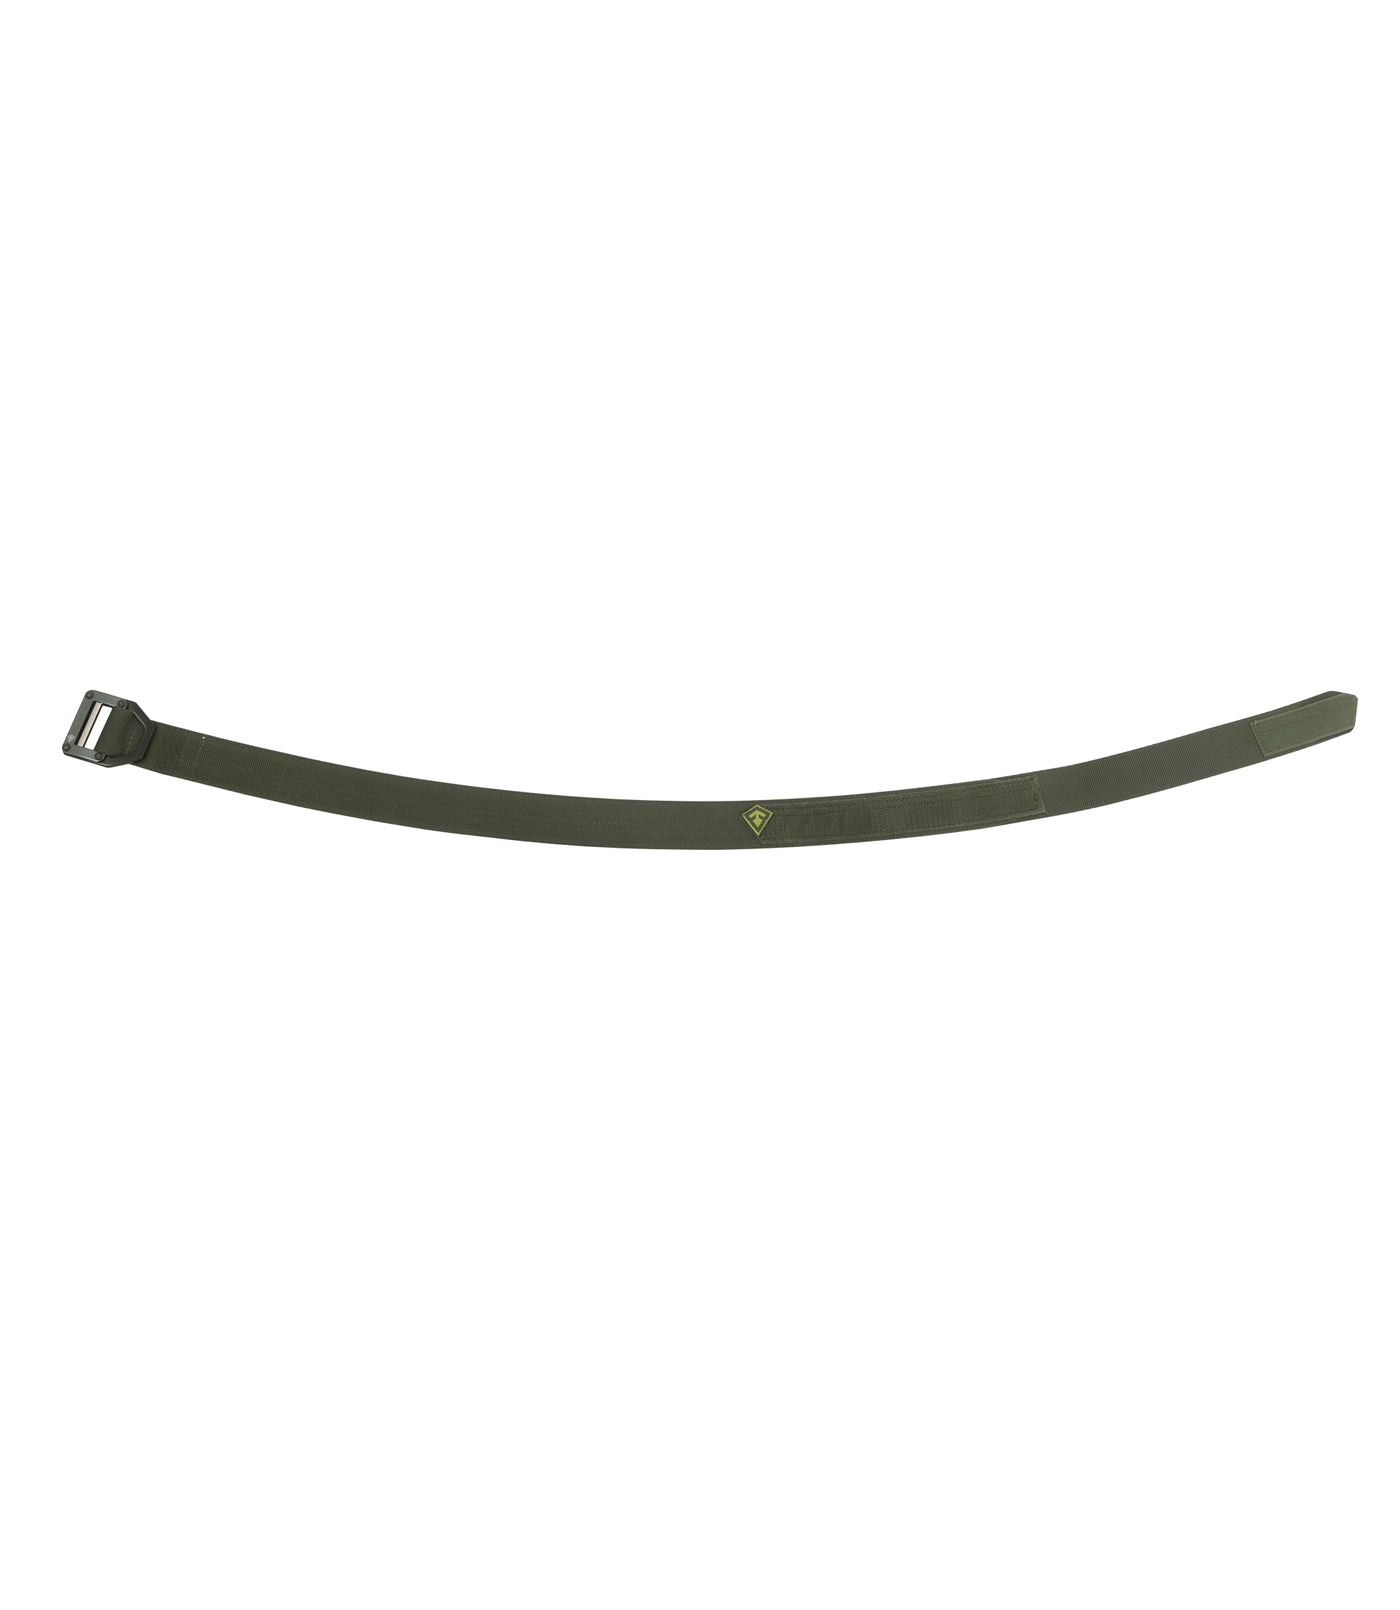 Front of Tactical Belt 1.75” in OD Green